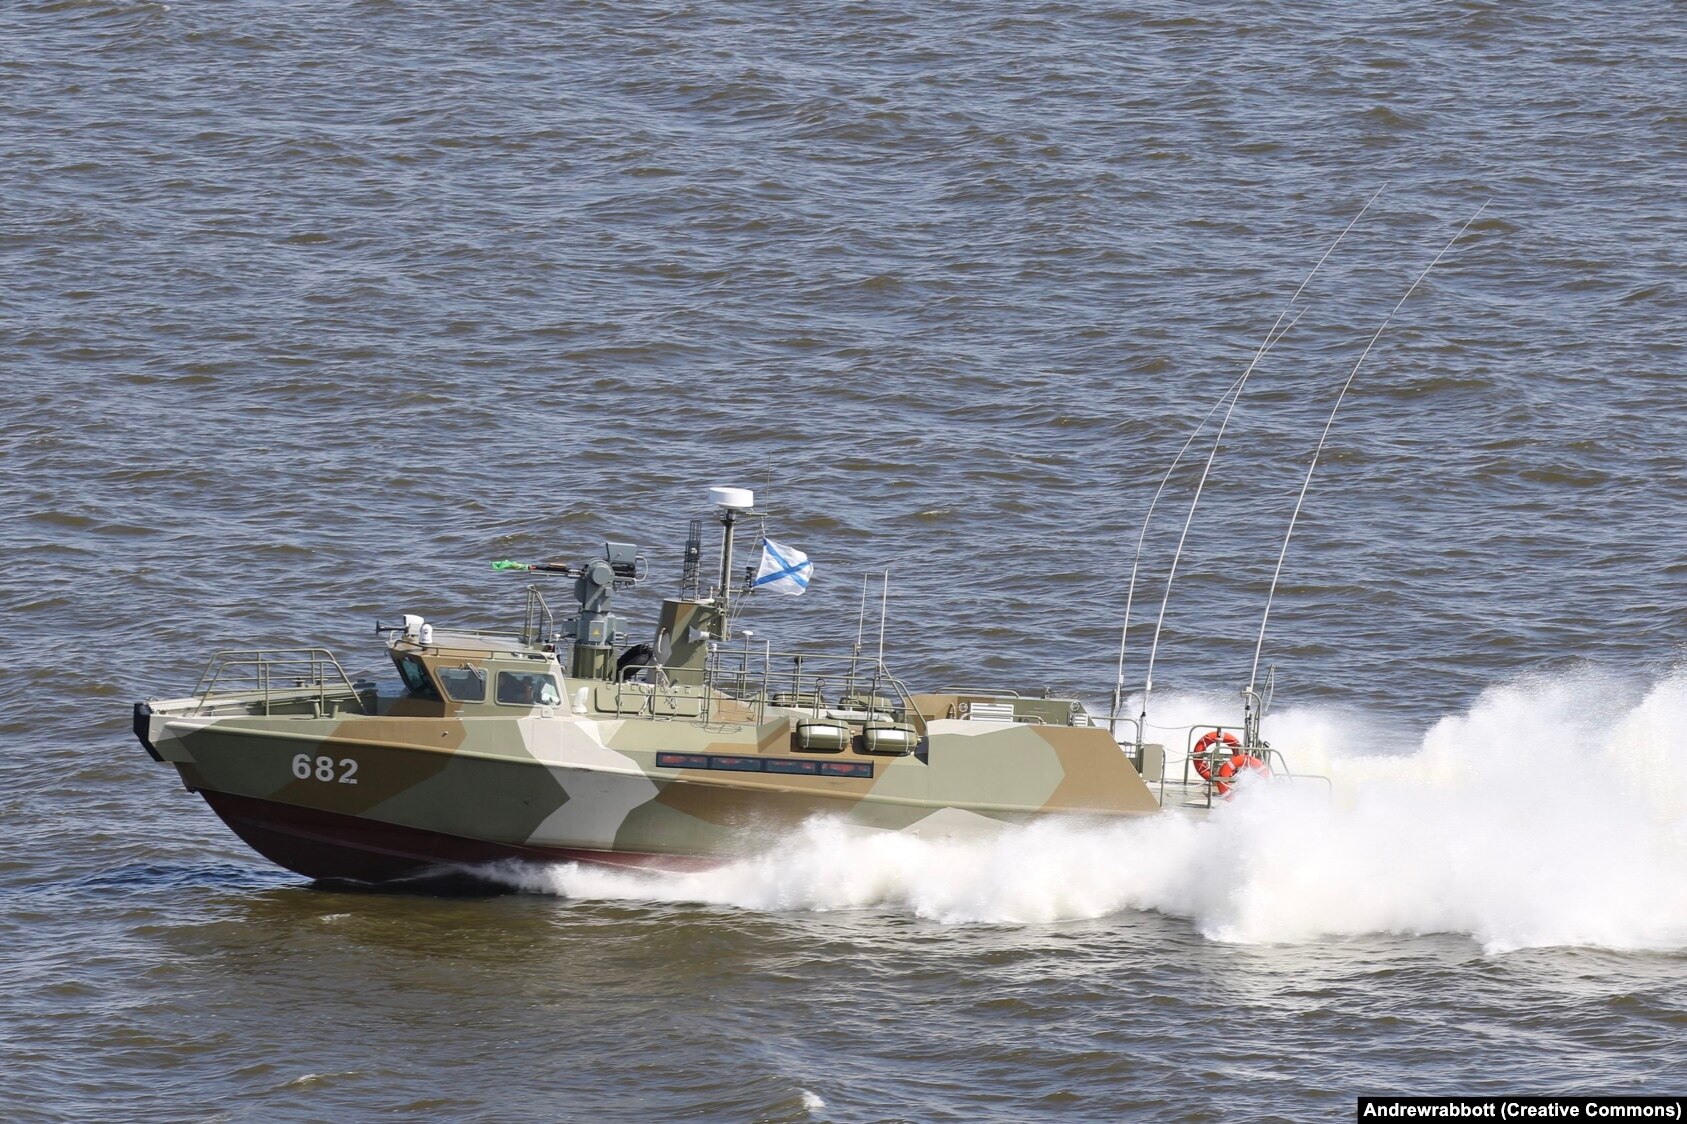 A Russian Raptor-class patrol boat near Kronstadt in 2016 &nbsp; At least two of the high-speed patrol boats were destroyed by a Ukrainian Bayraktar drone off Snake Island in March 2022.&nbsp;&nbsp; &nbsp; Raptors are fitted with a remotely controlled weapon, armor, and bullet-resistant glass. They first entered service with the Russian Navy in 2015.&nbsp;&nbsp; 